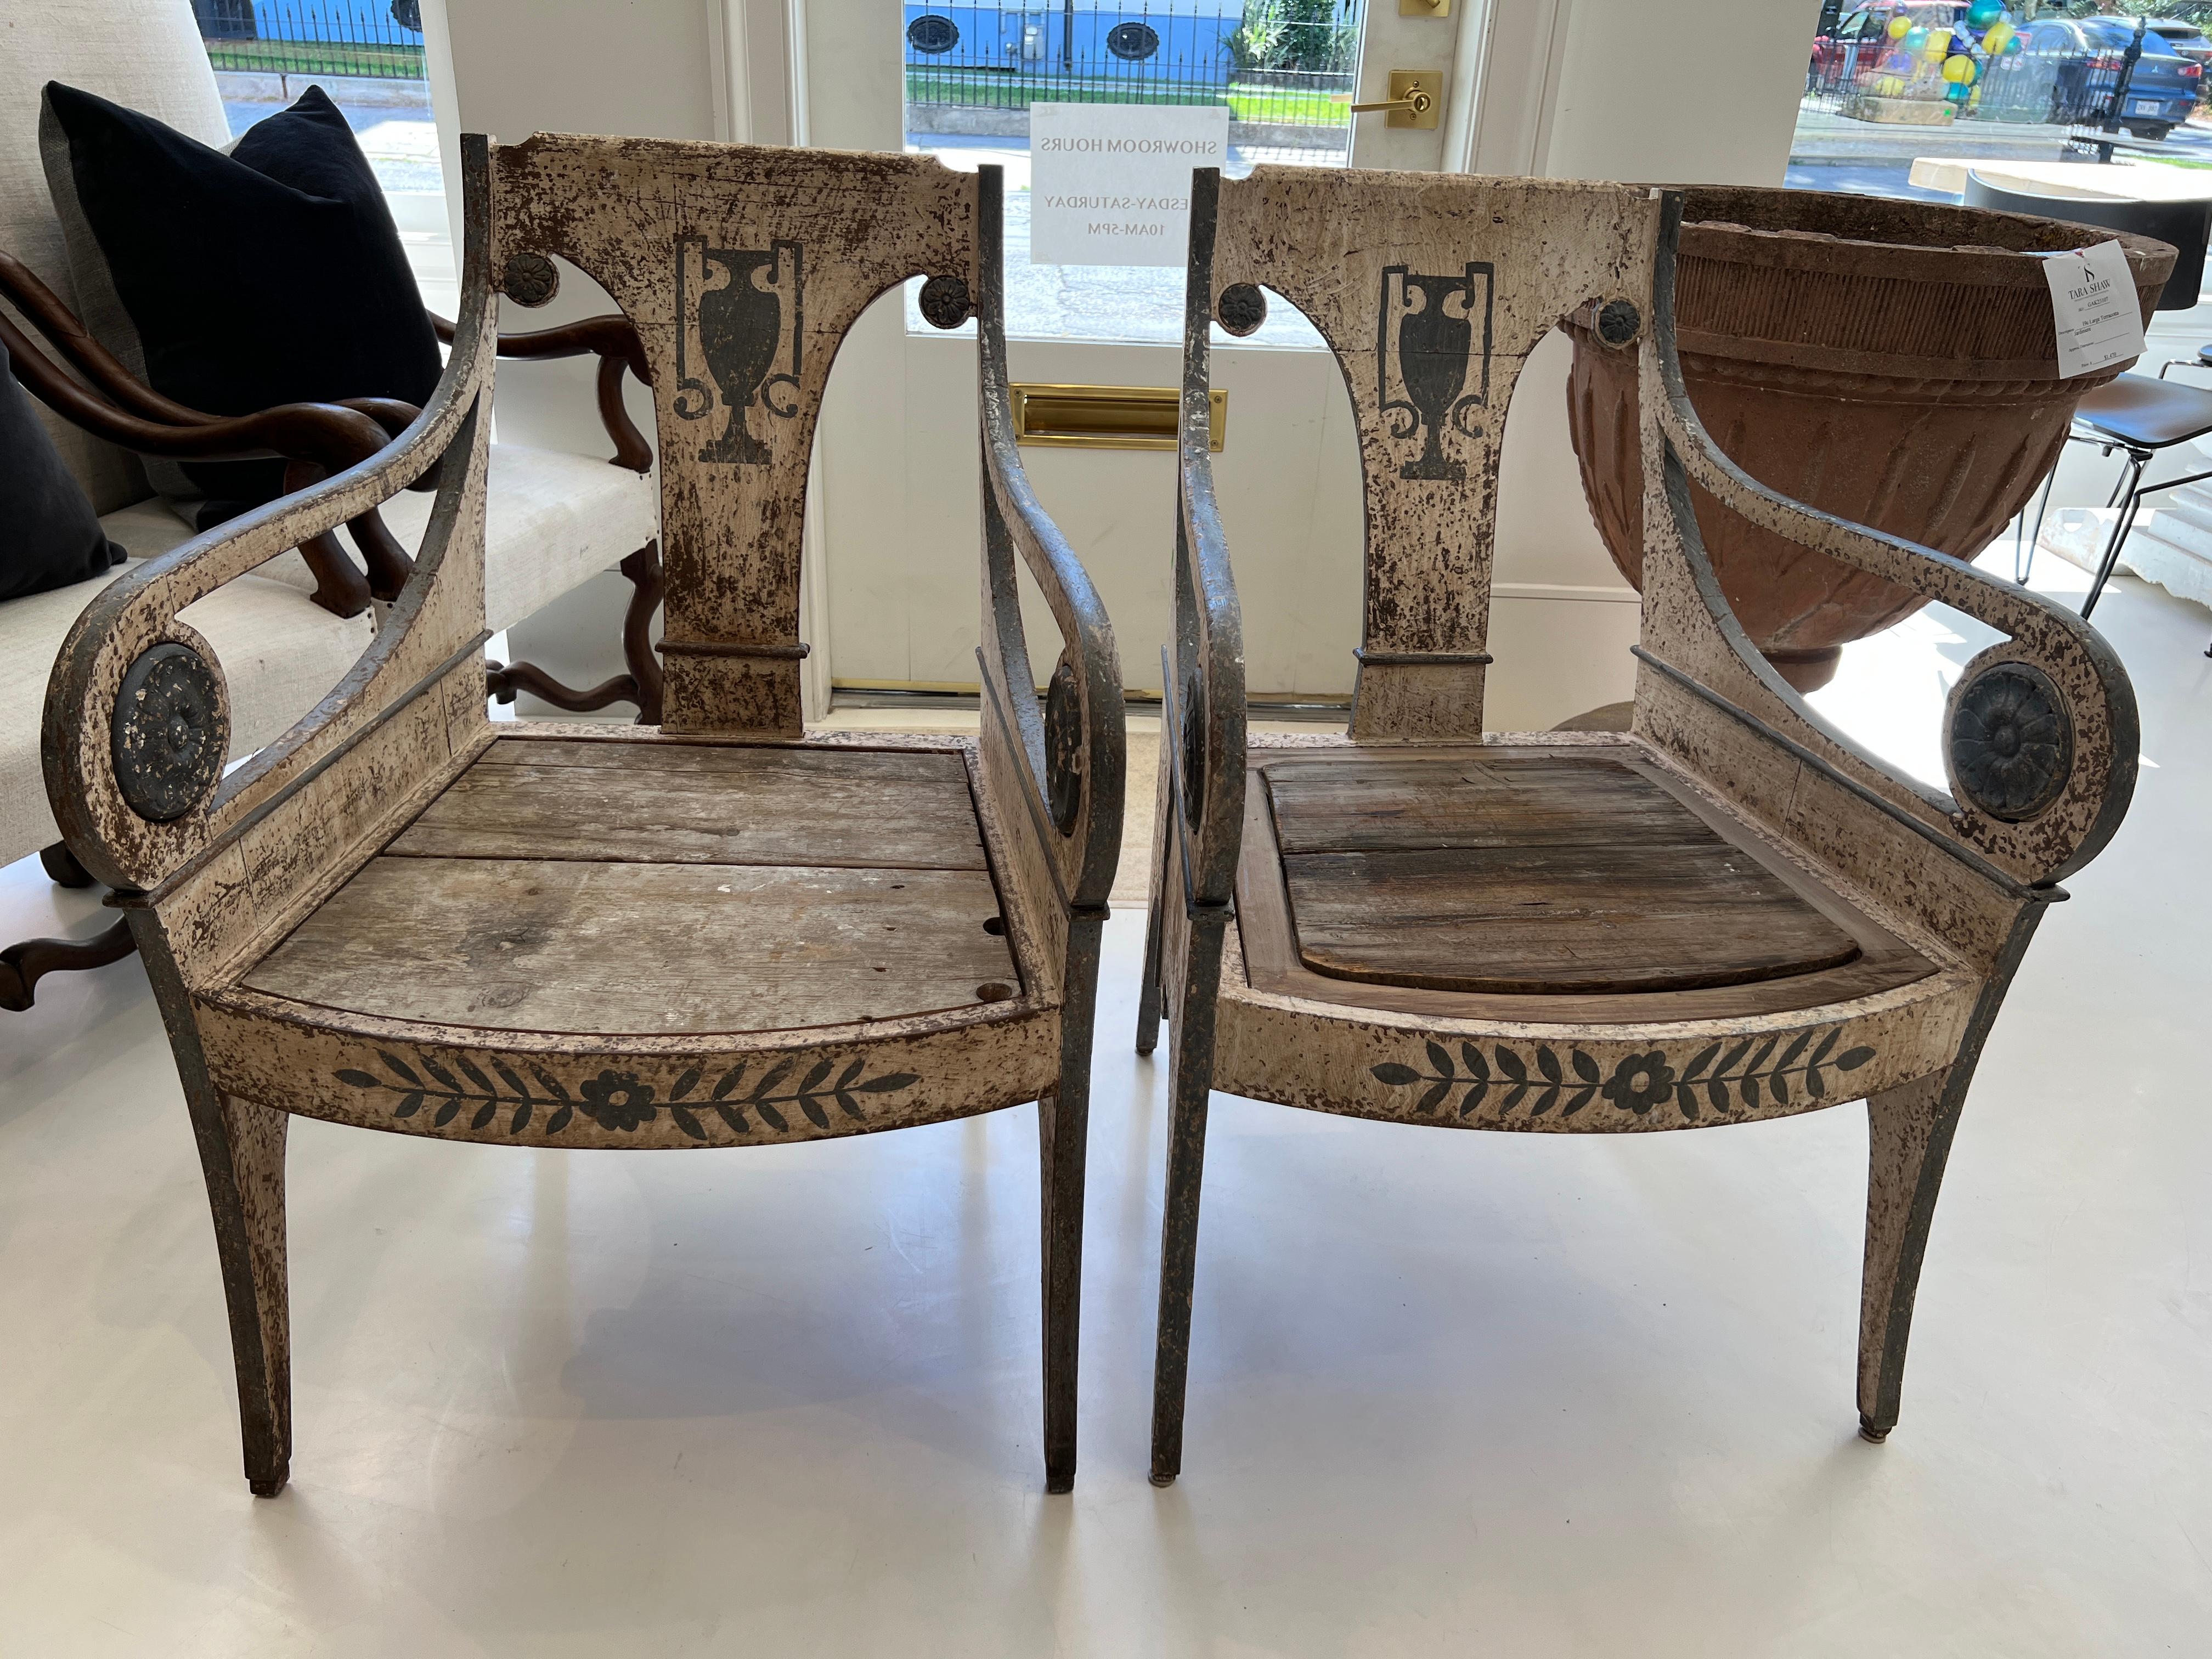 Beautifully designed wooden arm chairs with charming painted motif of urn on the back and leafy garland across the front apron. 

There are two sets of two chairs available.